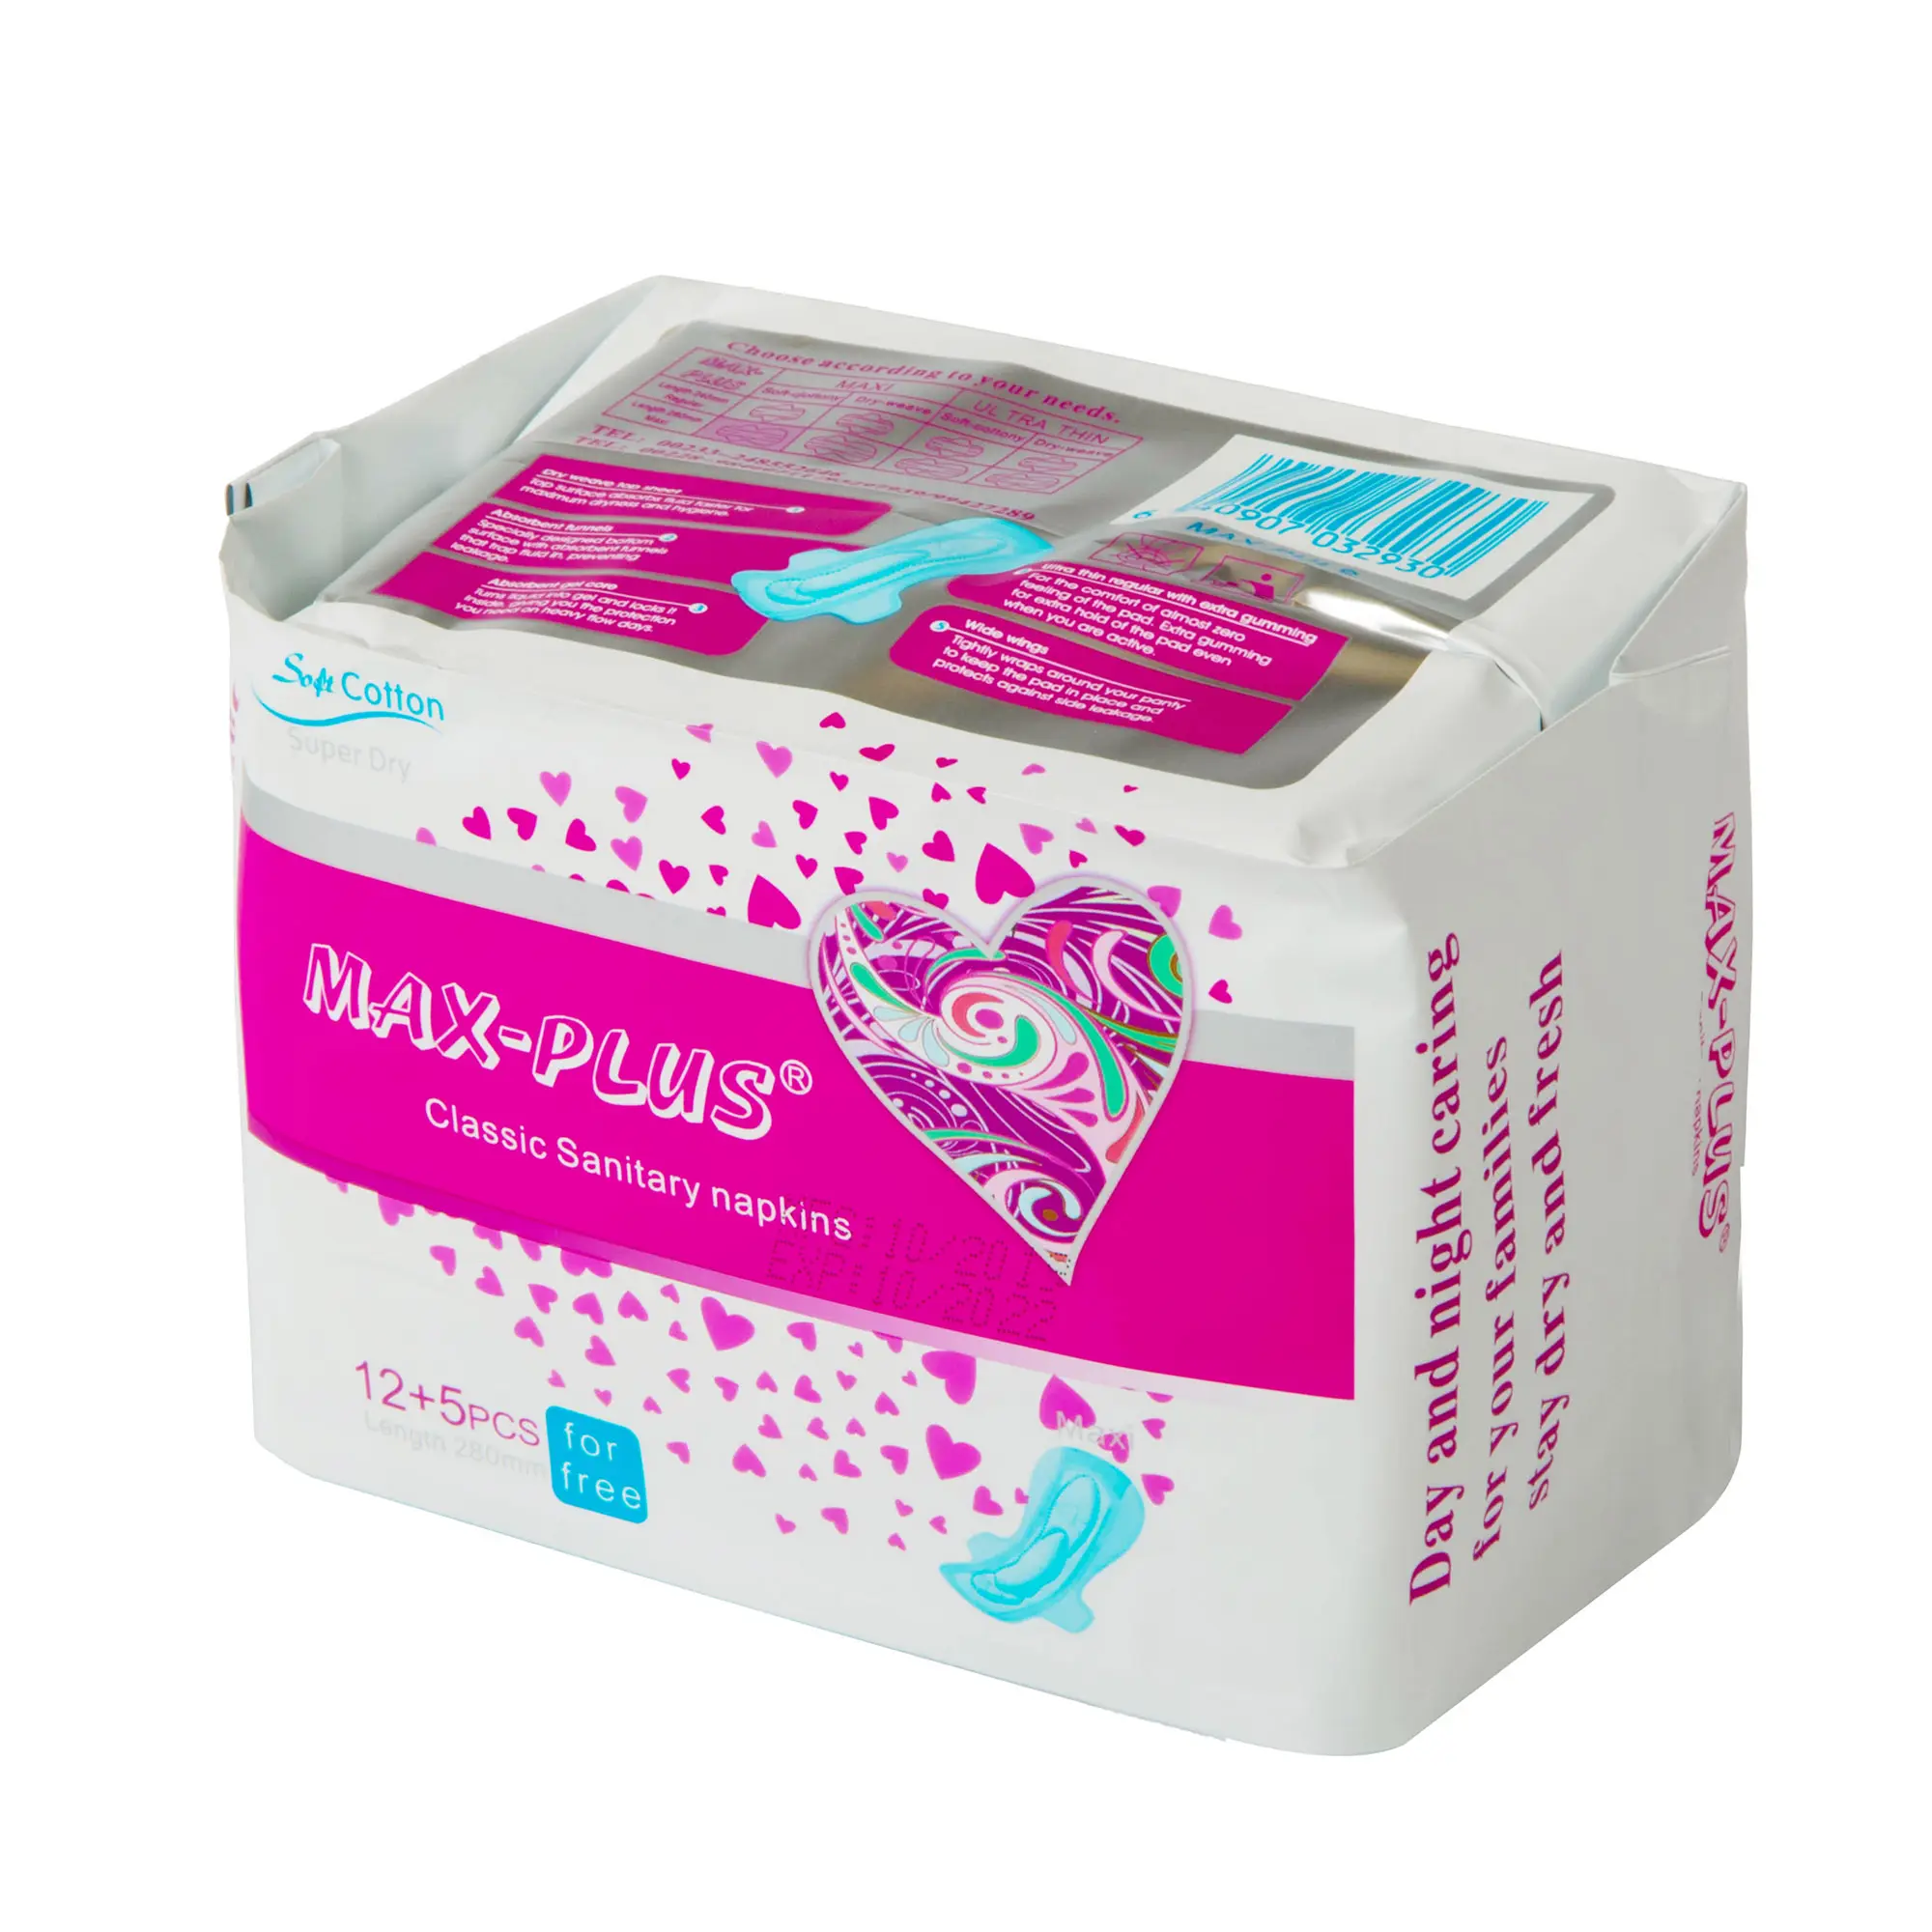 Max-plus cheap femina thick sanitary napkins hot selling in Togo and Ghana